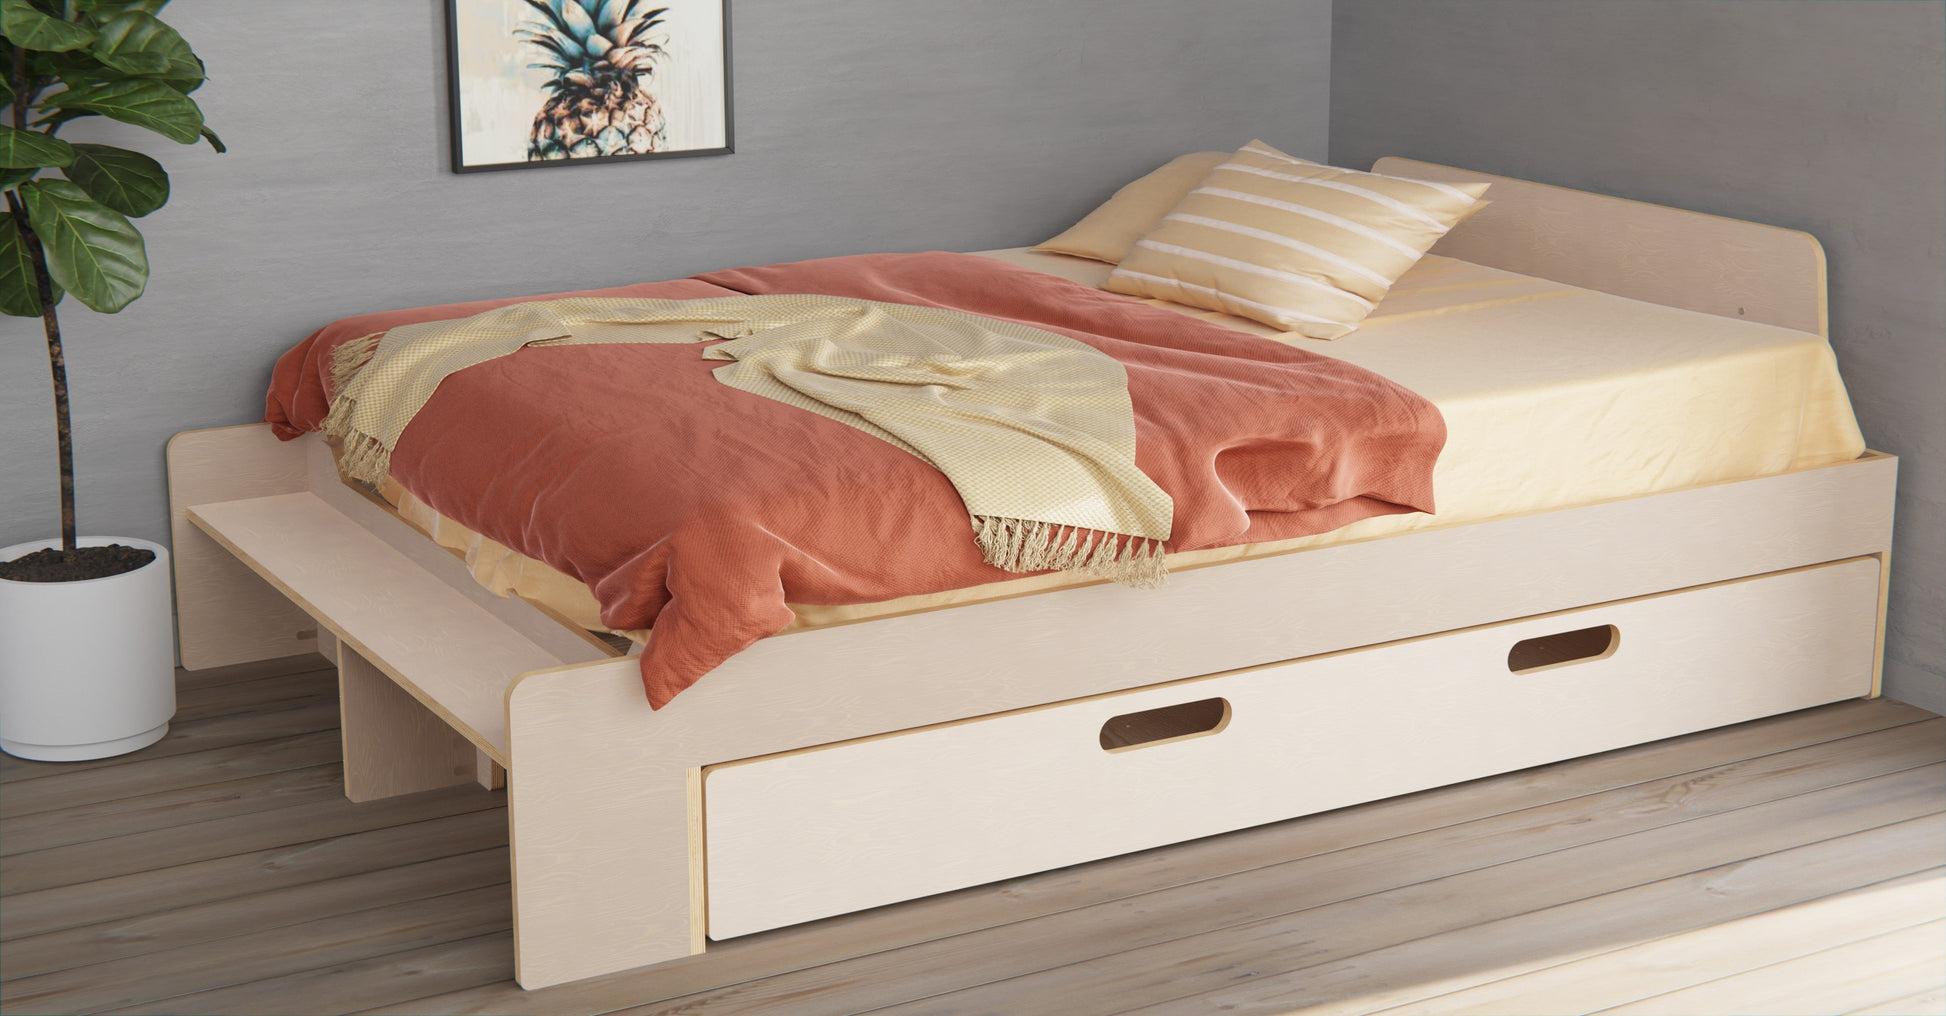 Elevate your bedroom with our double size plywood bed frames. Includes a shelf and headboard for added luxury.